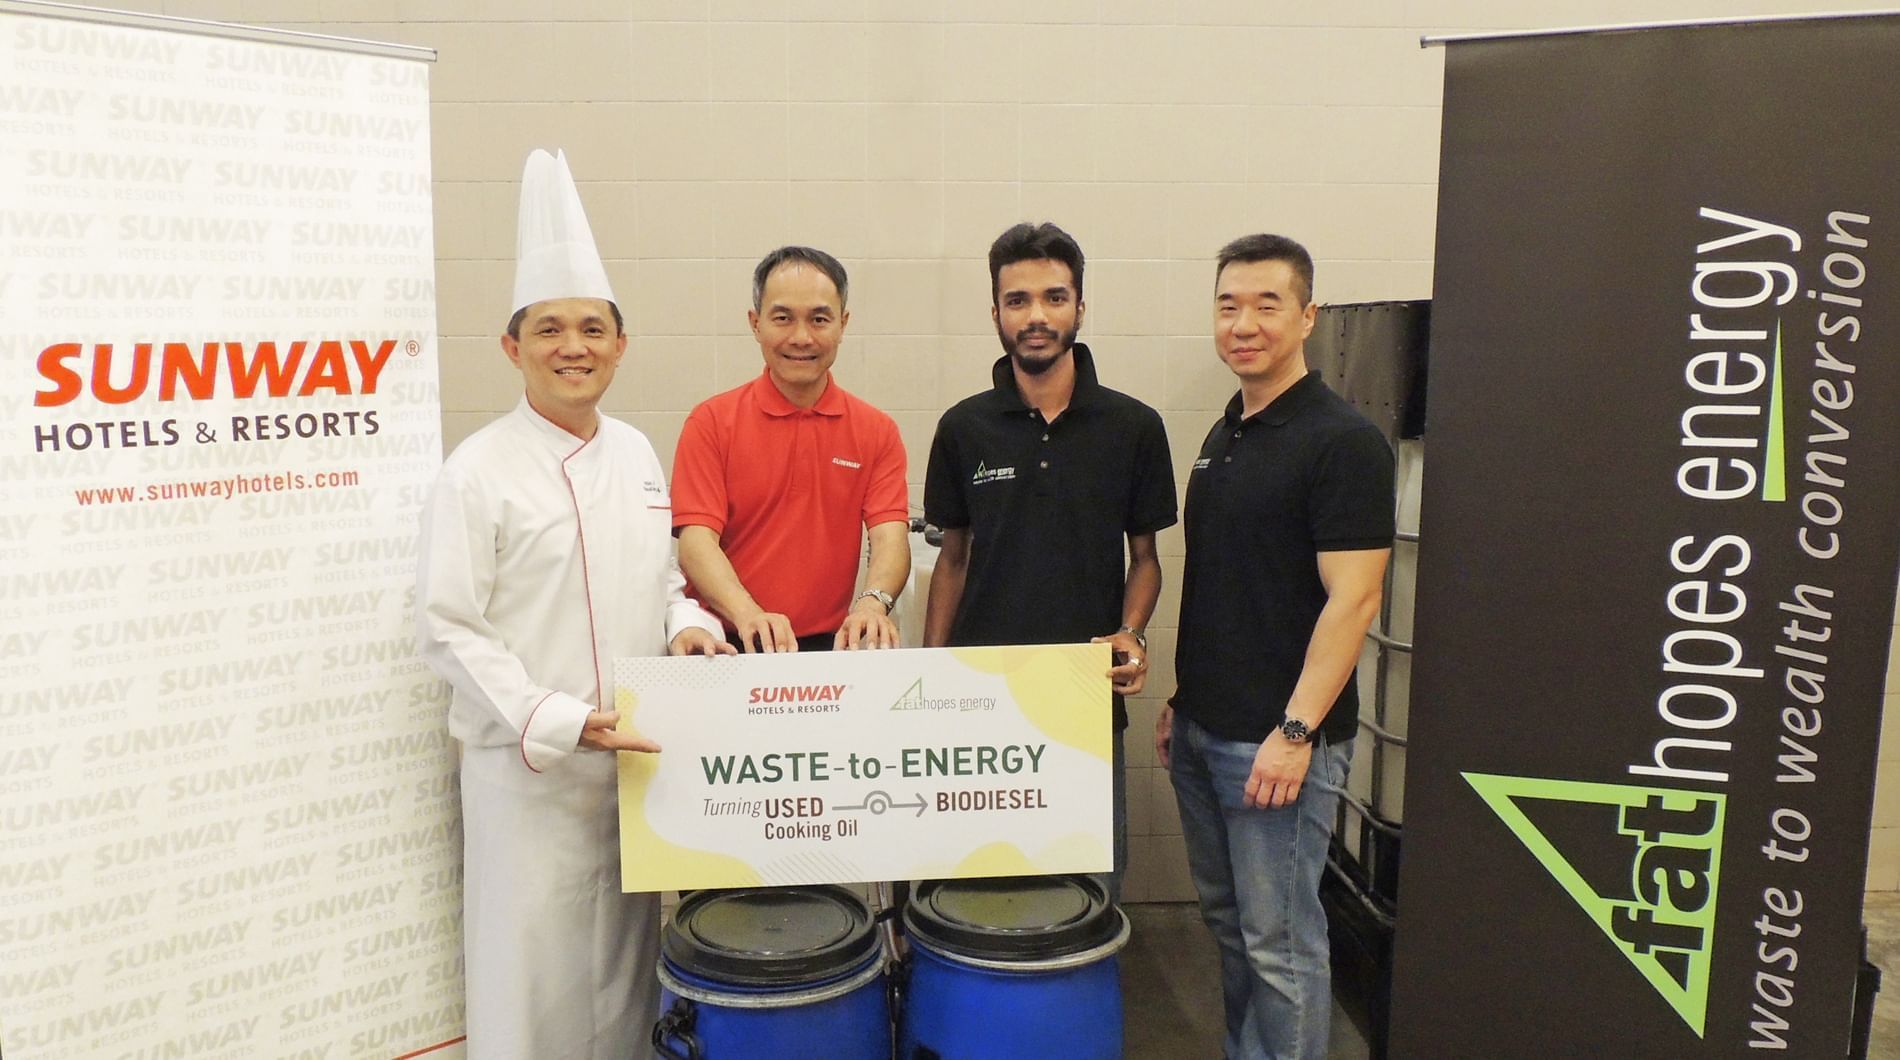 Fat Hopes Energy for Fuel event at Sunway Resort Hotel and Spa